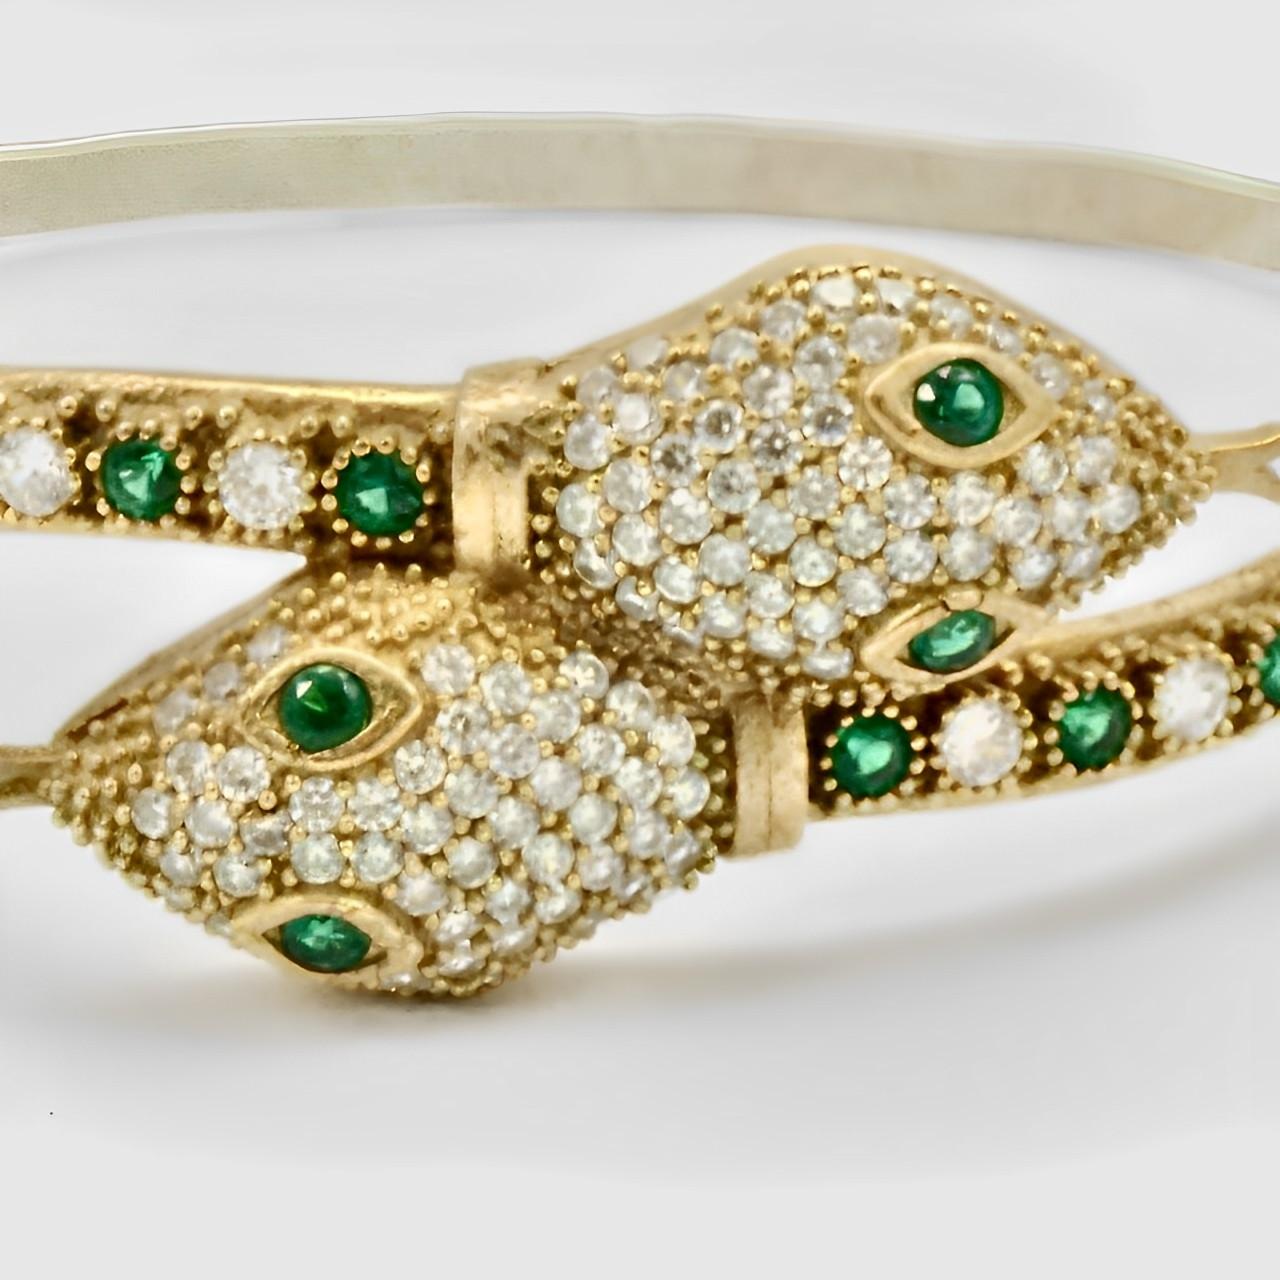 Fabulous gold plated snake bracelet set with green and clear rhinestones. Measuring inside length diameter 5.8 cm / 2.28 inches by width diameter 4 cm / 1.57 inch. It appears that the silver tone ornate back is a later addition.

This is a beautiful